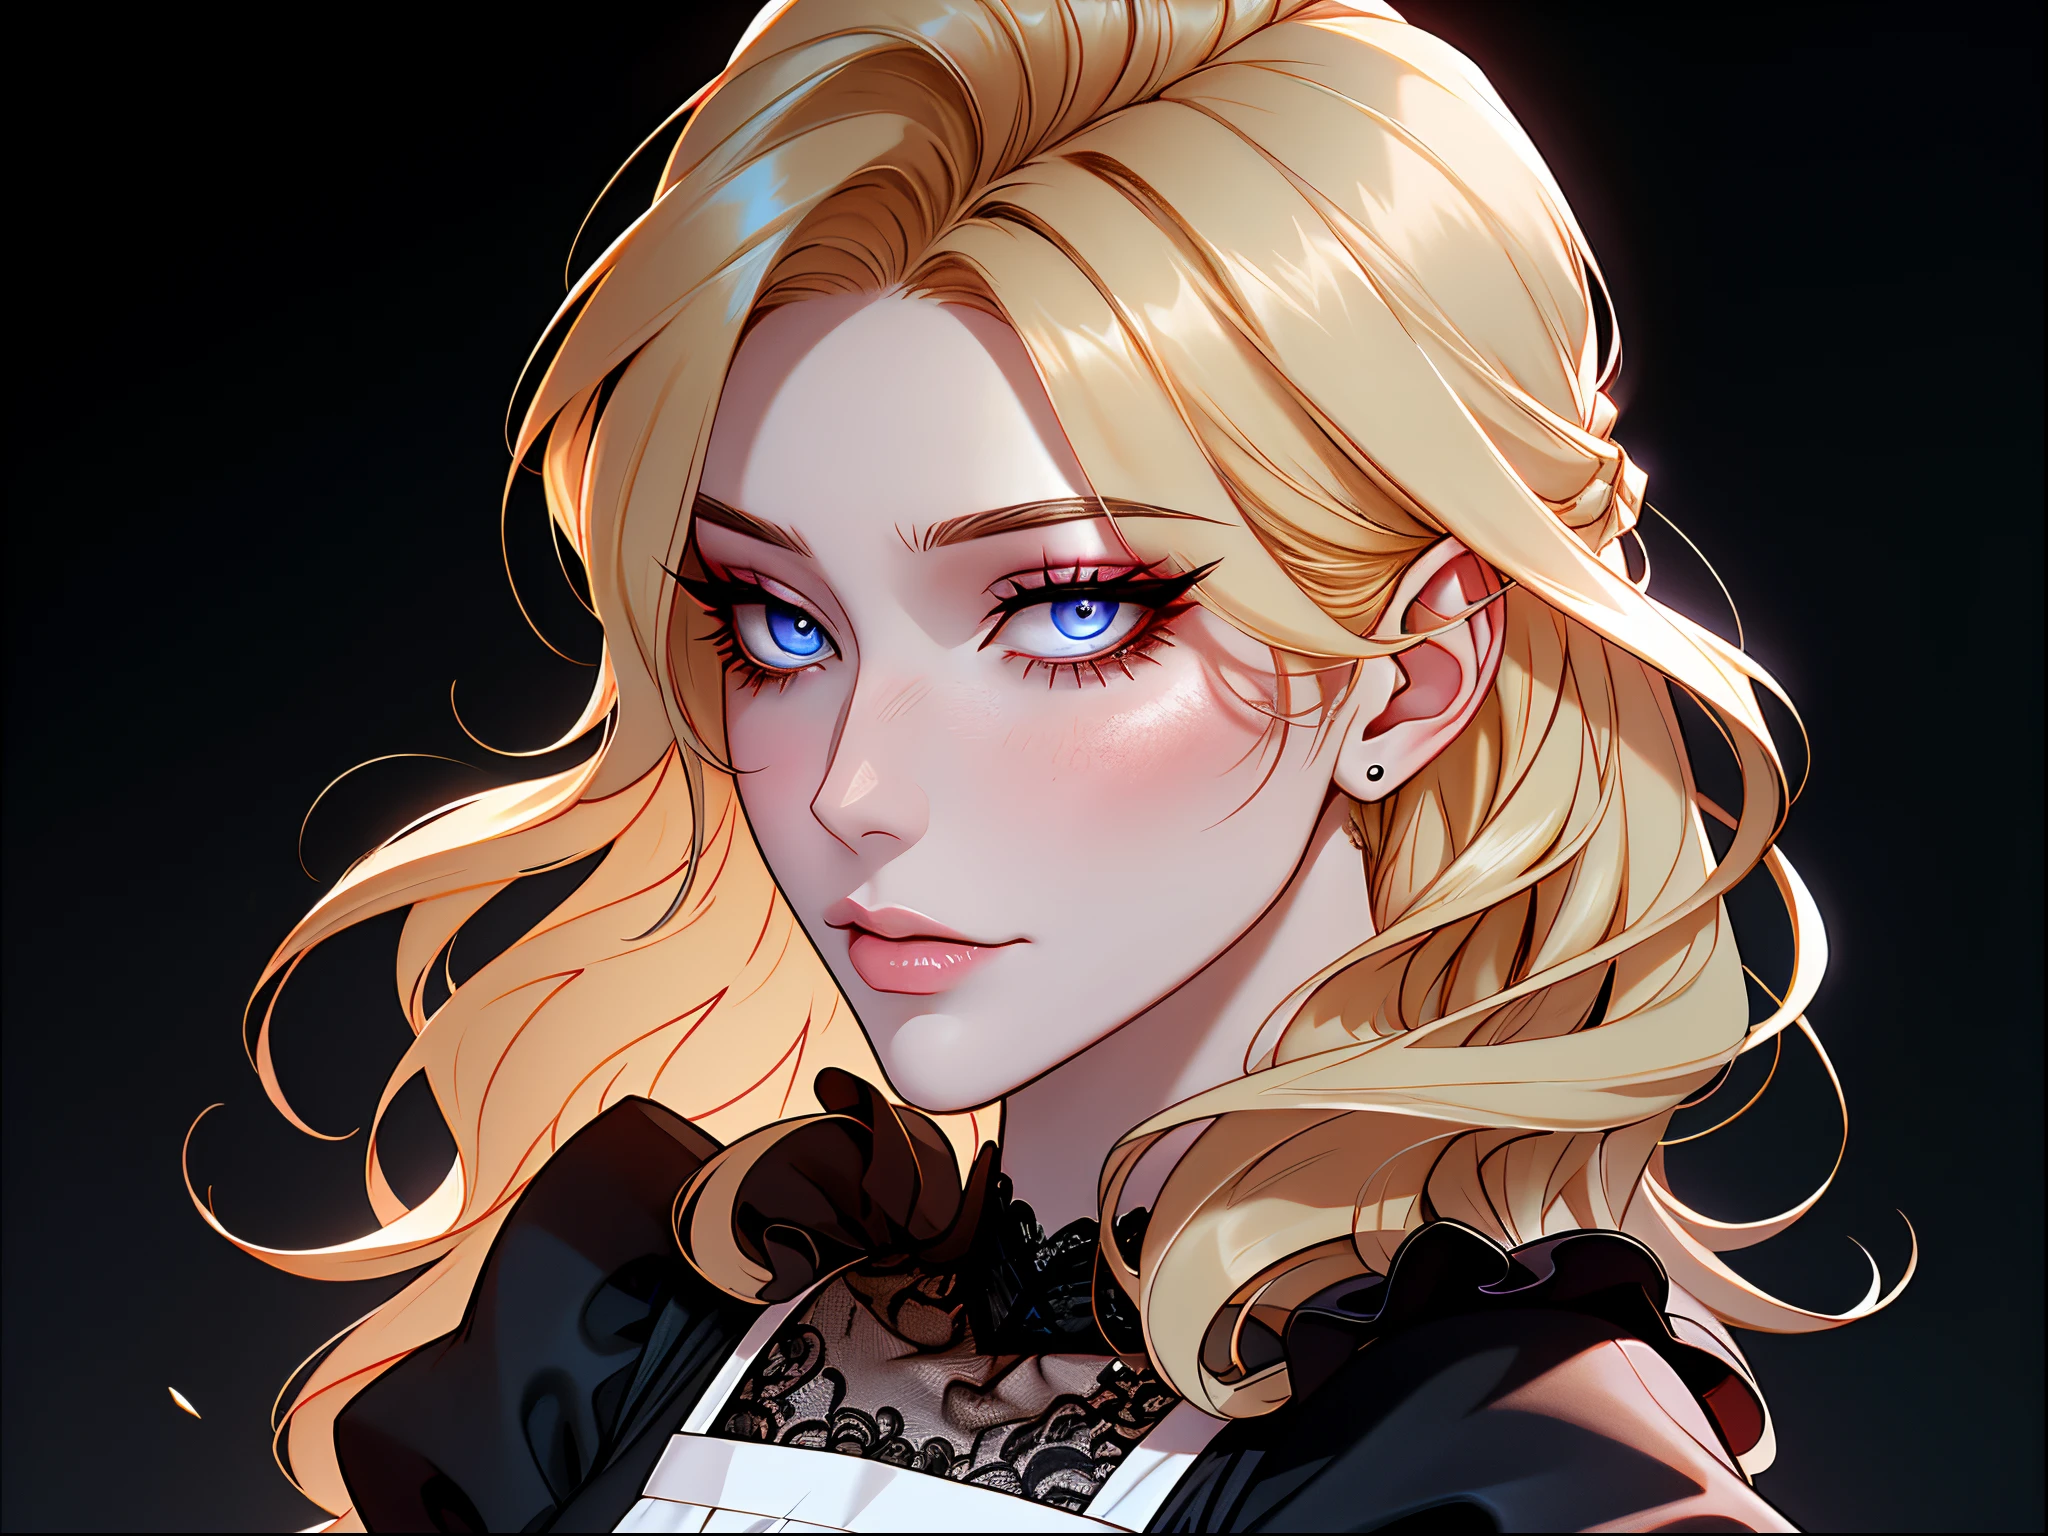 Shoujo style, Aesthetic background, Romance Manhwa, 1girl, blonde woman, hairlong, Bangans close one eye)), eyes with blue color, irritable, grimalkin, bags under eyes, Russian, grimalkin, housemaid, Black dress with white trim, with a full skirt knee-length or higher, White half apron, usually with ruffles or lace, head slightly turned to the side, inform, mascara, makeup, Dark background, clavicle, puffy sleeves, portraite of a, upper-body, frills, closed mouth, Detailed eyes, (close up), (((Image Macro Details))), pale skin